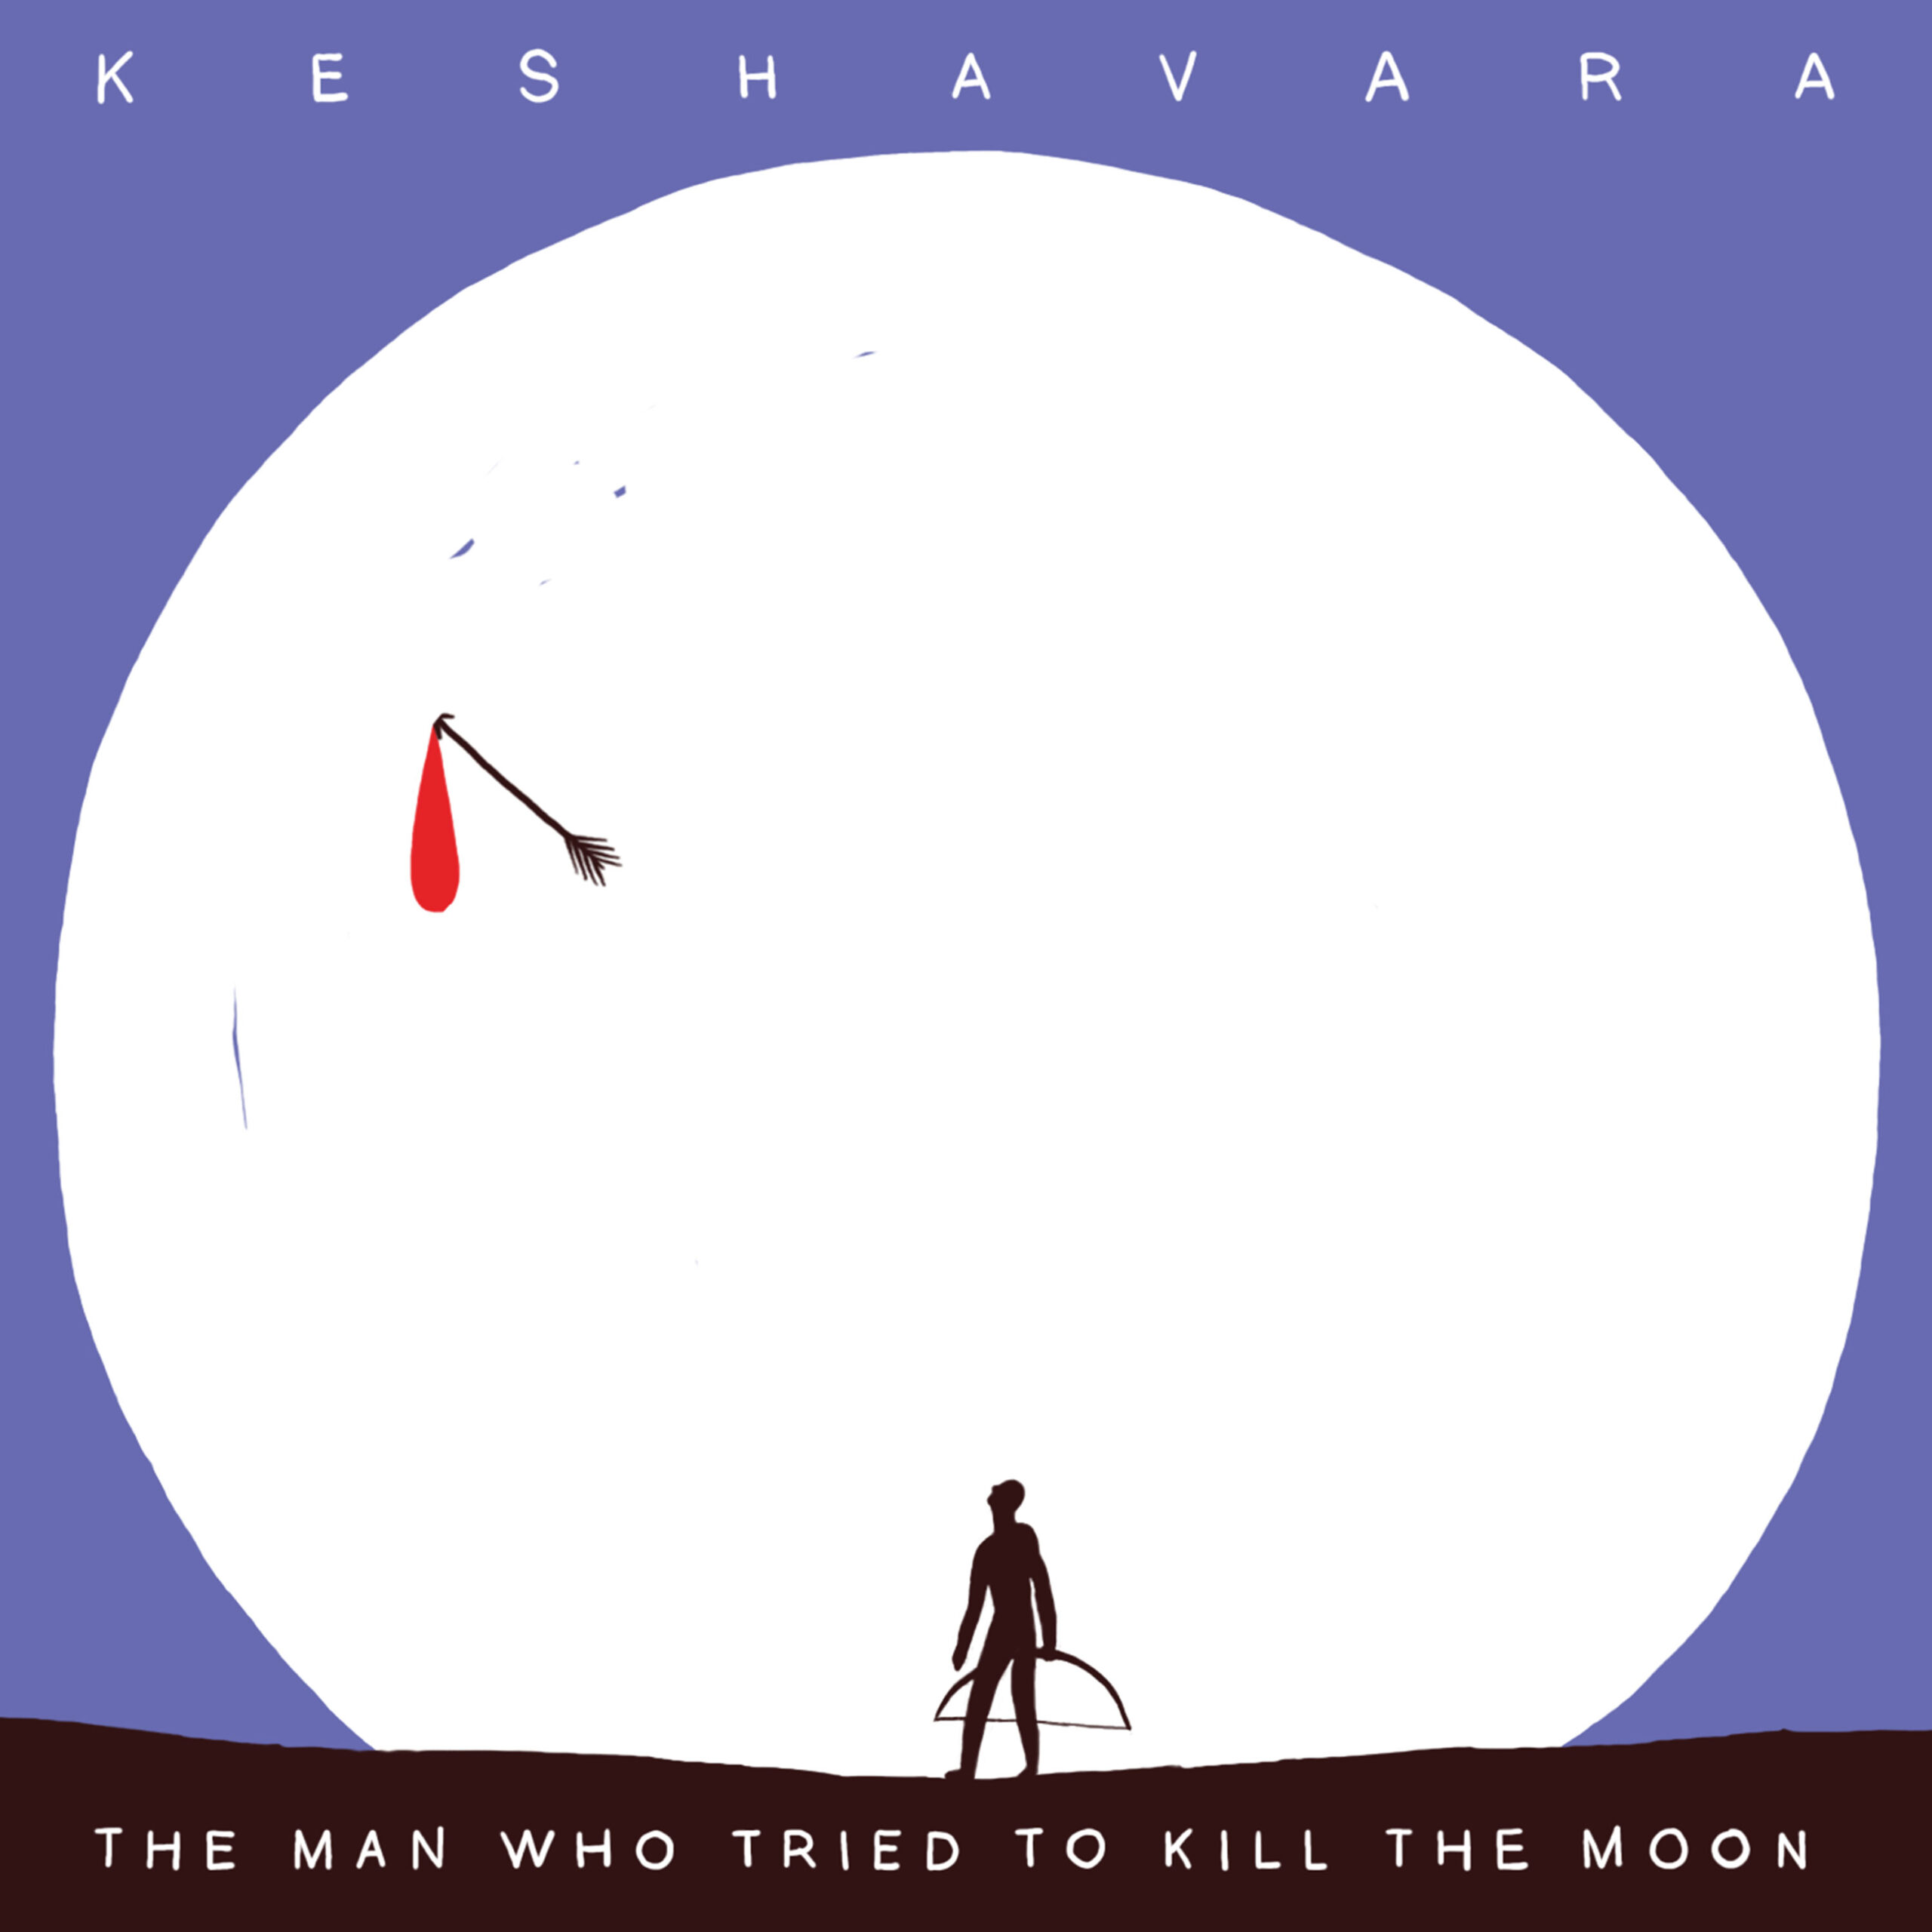 The Man Who Tried to Kill the Moon